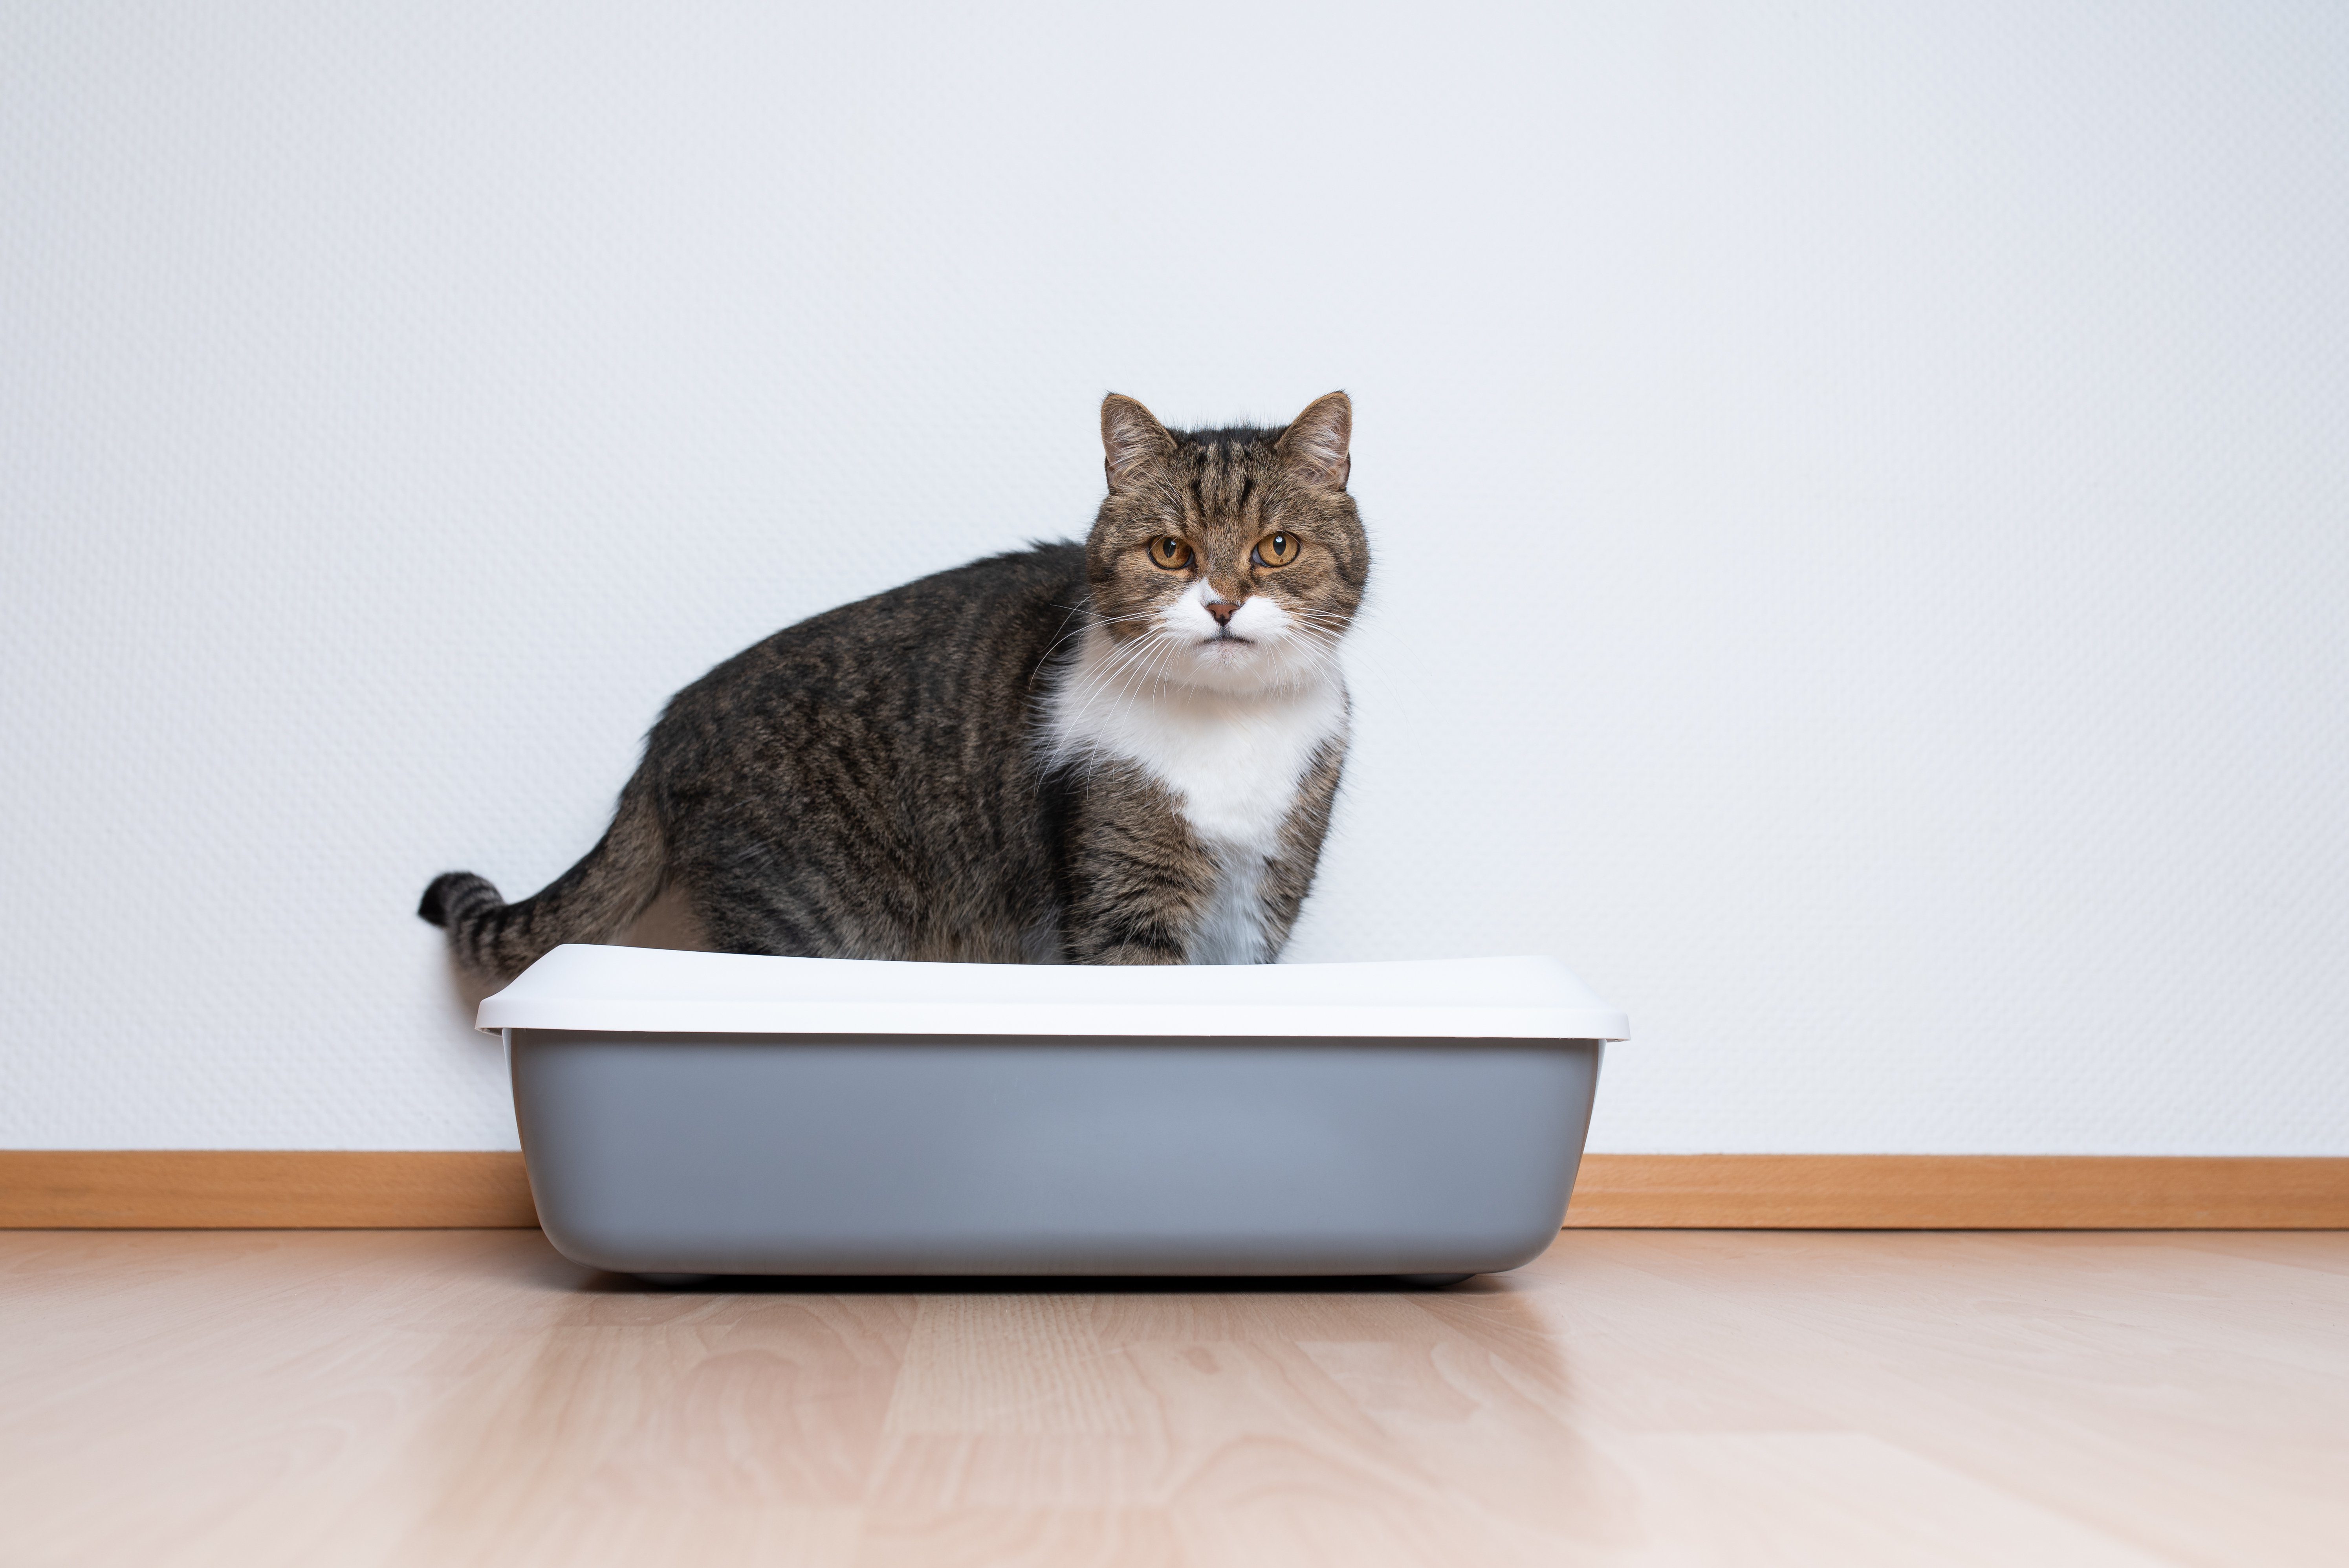 How Do Cats Know How to Use a Litter Box? Reader's Digest